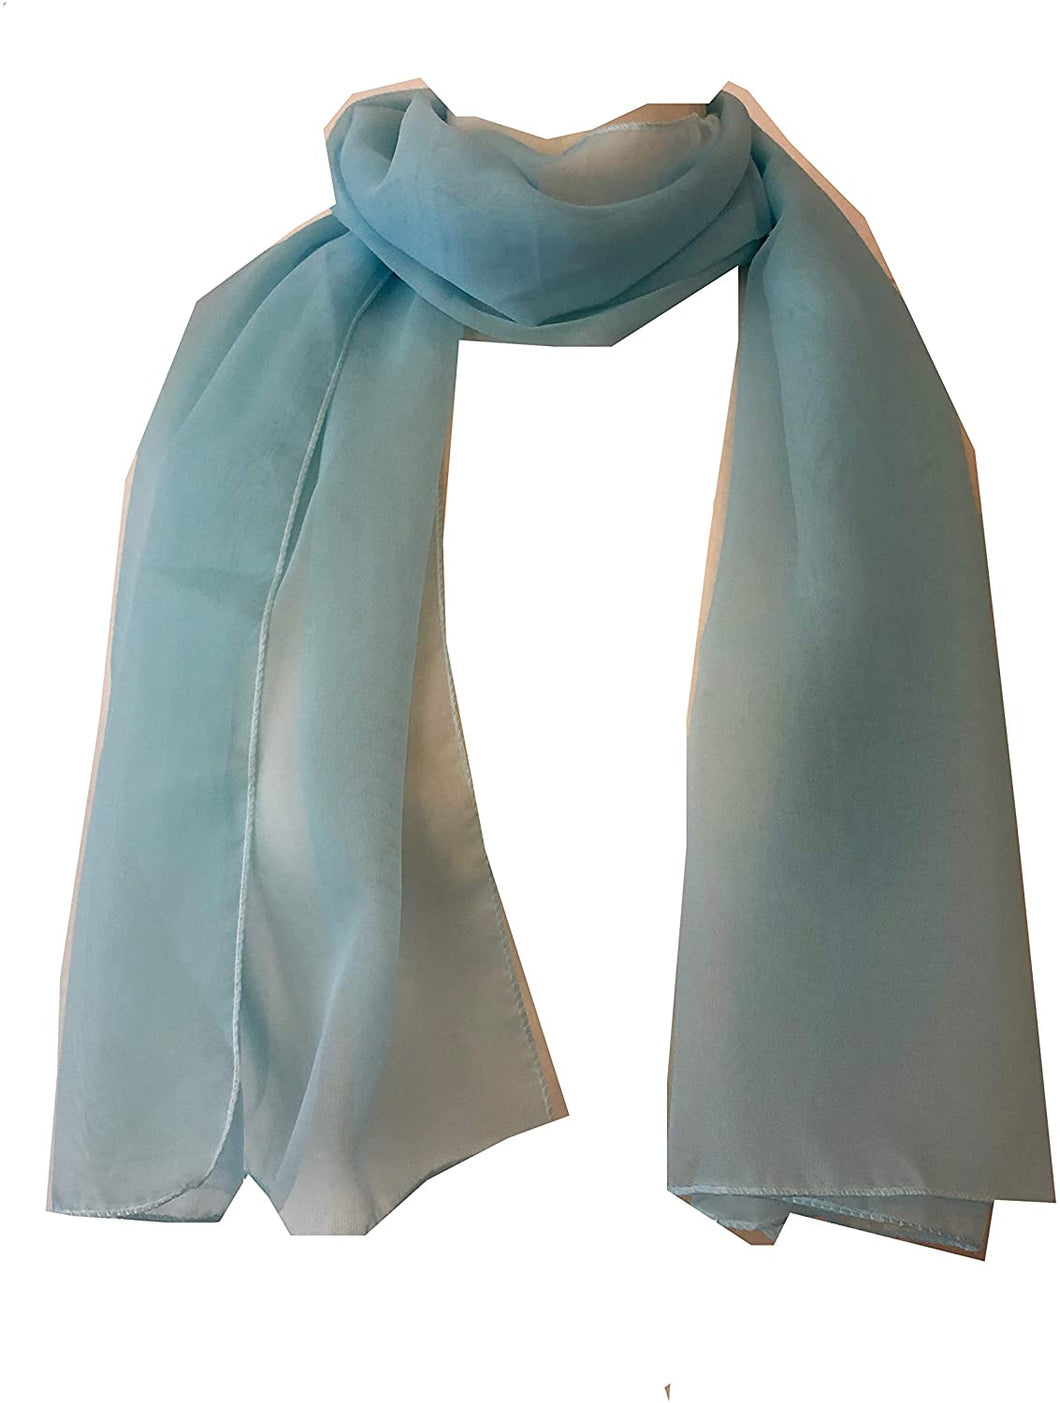 Plain Sky Blue Chiffon Style Scarf Thin Pretty Scarf Great for Any Outfit Lovely Gift